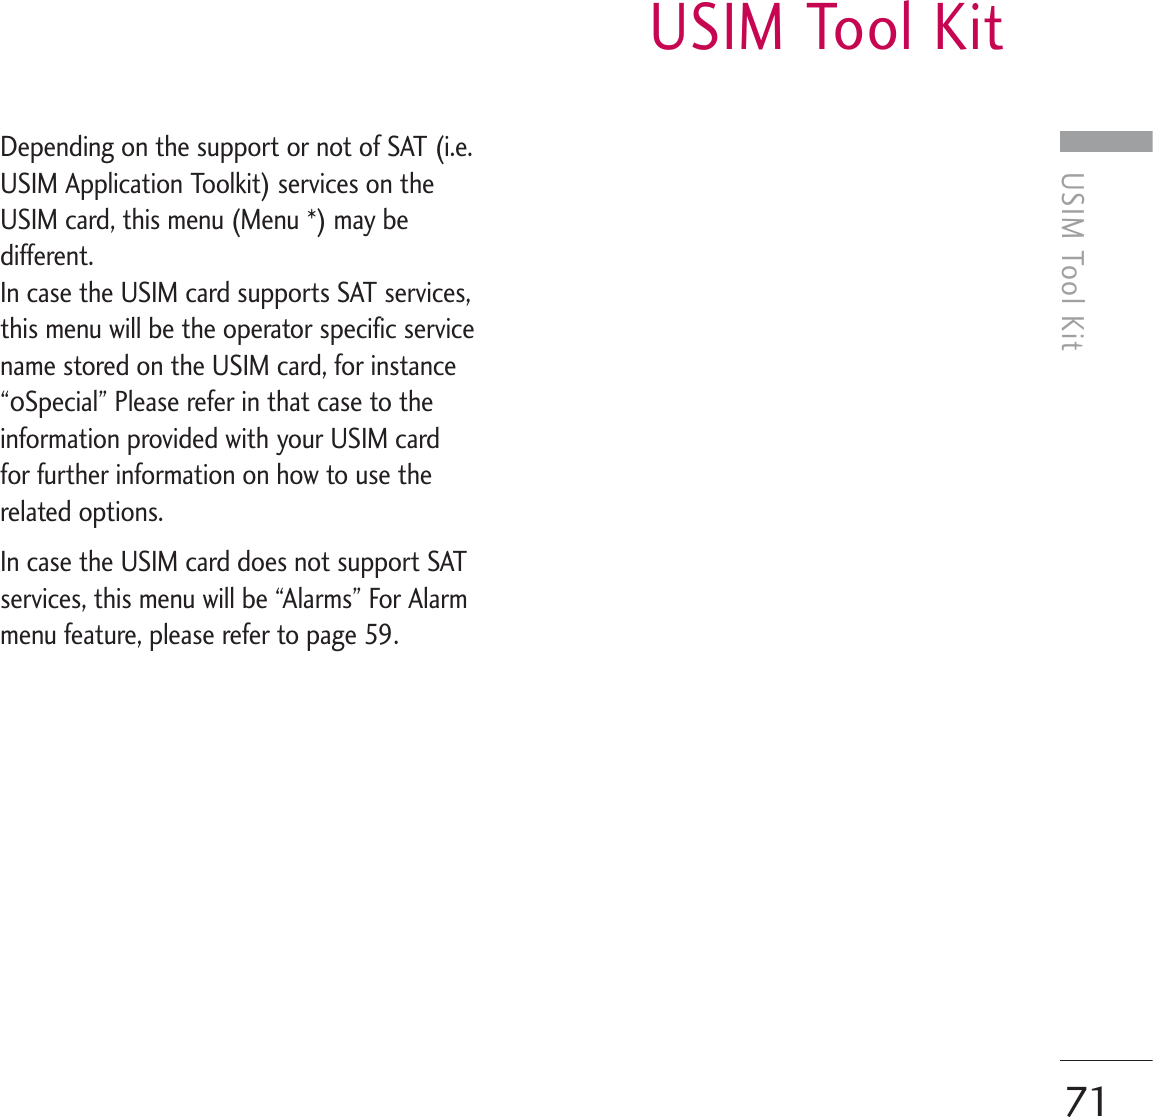 USIM Tool KitUSIM Tool Kit71Depending on the support or not of SAT (i.e.USIM Application Toolkit) services on theUSIM card, this menu (Menu *) may bedifferent. In case the USIM card supports SAT services,this menu will be the operator specific servicename stored on the USIM card, for instance“∞Special” Please refer in that case to theinformation provided with your USIM cardfor further information on how to use therelated options.In case the USIM card does not support SATservices, this menu will be “Alarms” For Alarmmenu feature, please refer to page 59.